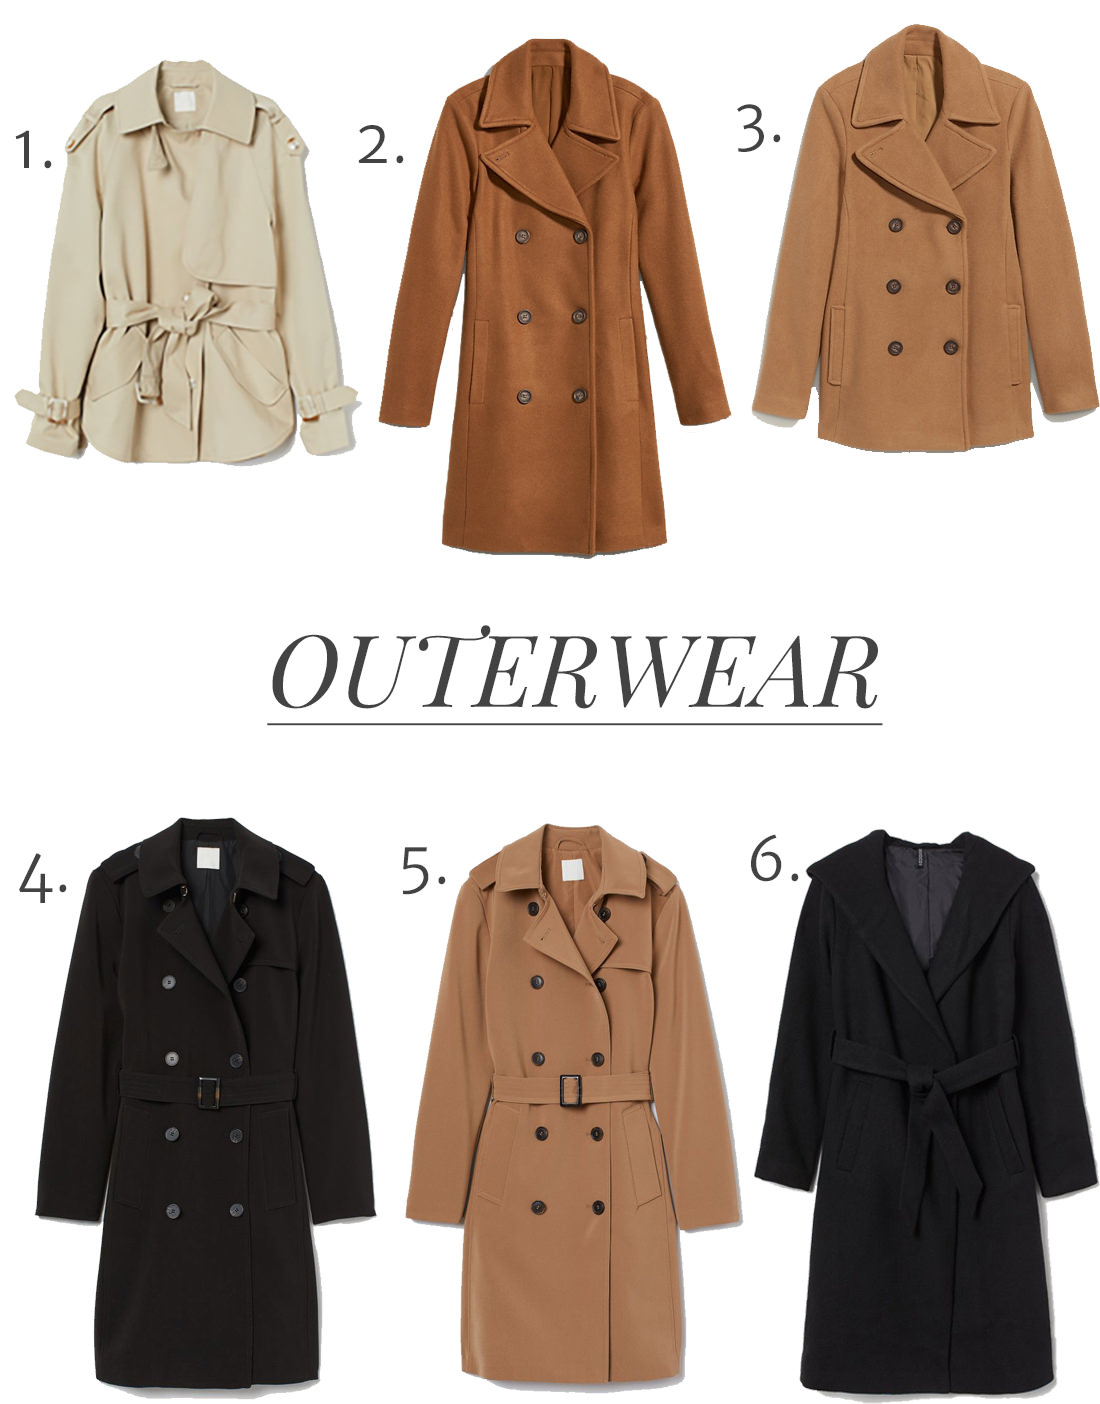 WHAT TO WEAR FOR WEDDING PROFESSIONALS JACKETS